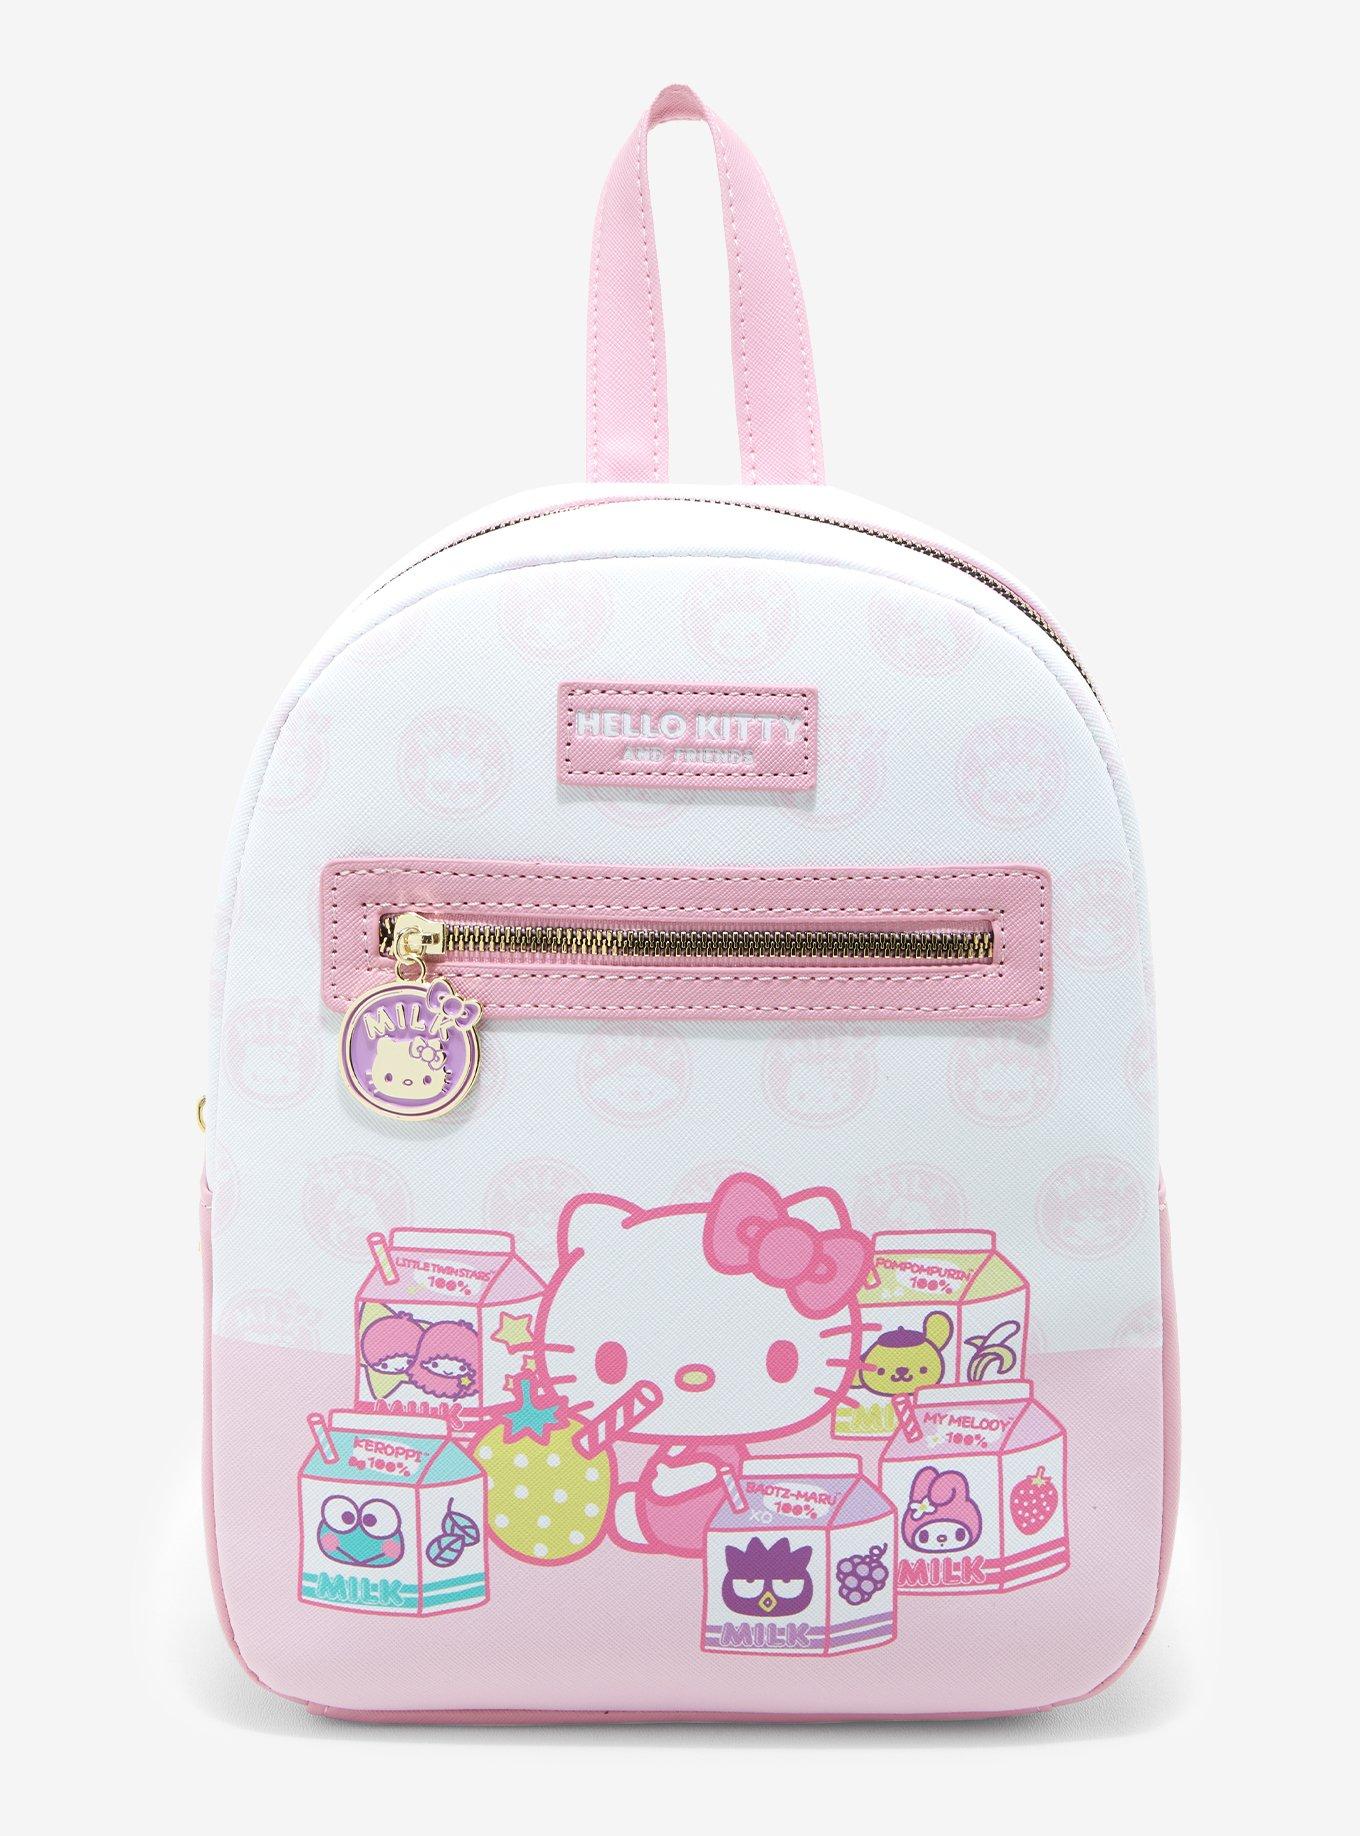 Hello Kitty Backpack for Girls - Hello Kitty School Supplies Bundle with  15 Hello Kitty School Bag Plus Stickers, Pink Water Bottle, and More  (Hello